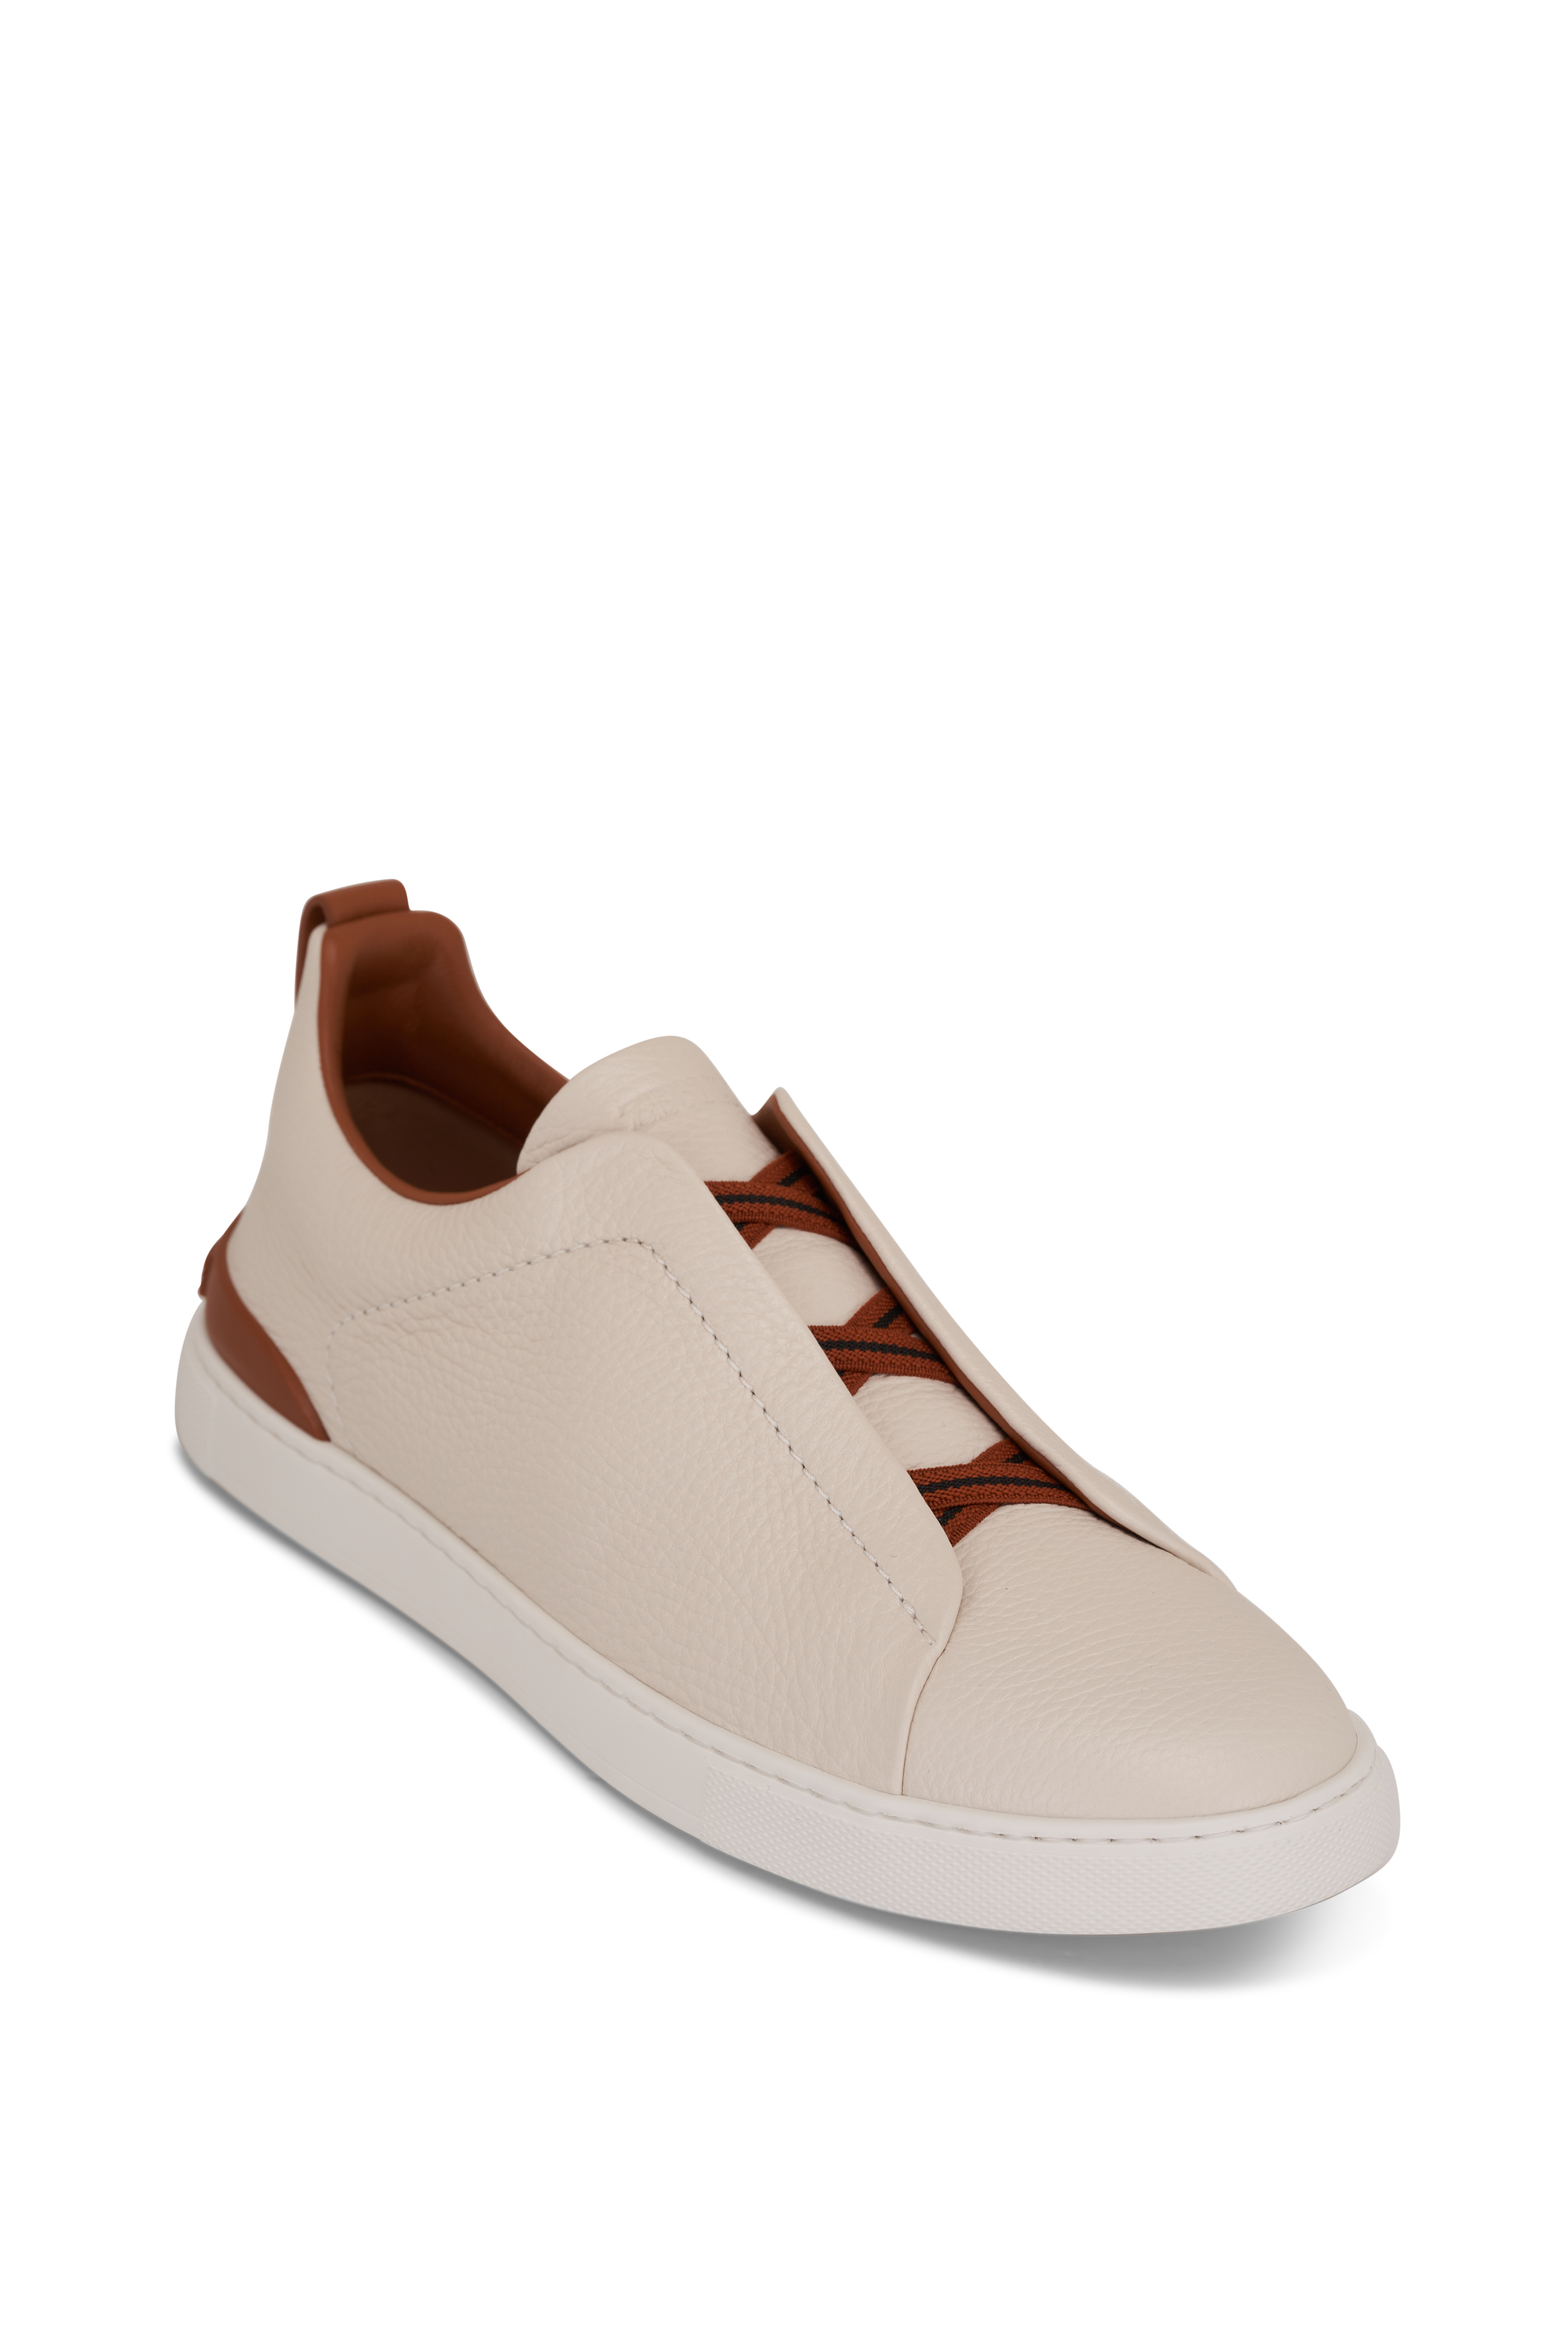 Louis Vuitton Brown/Beige Fabric Leather Mesh and Suede Cosmos Low Top  Sneakers Size 40 - ShopStyle